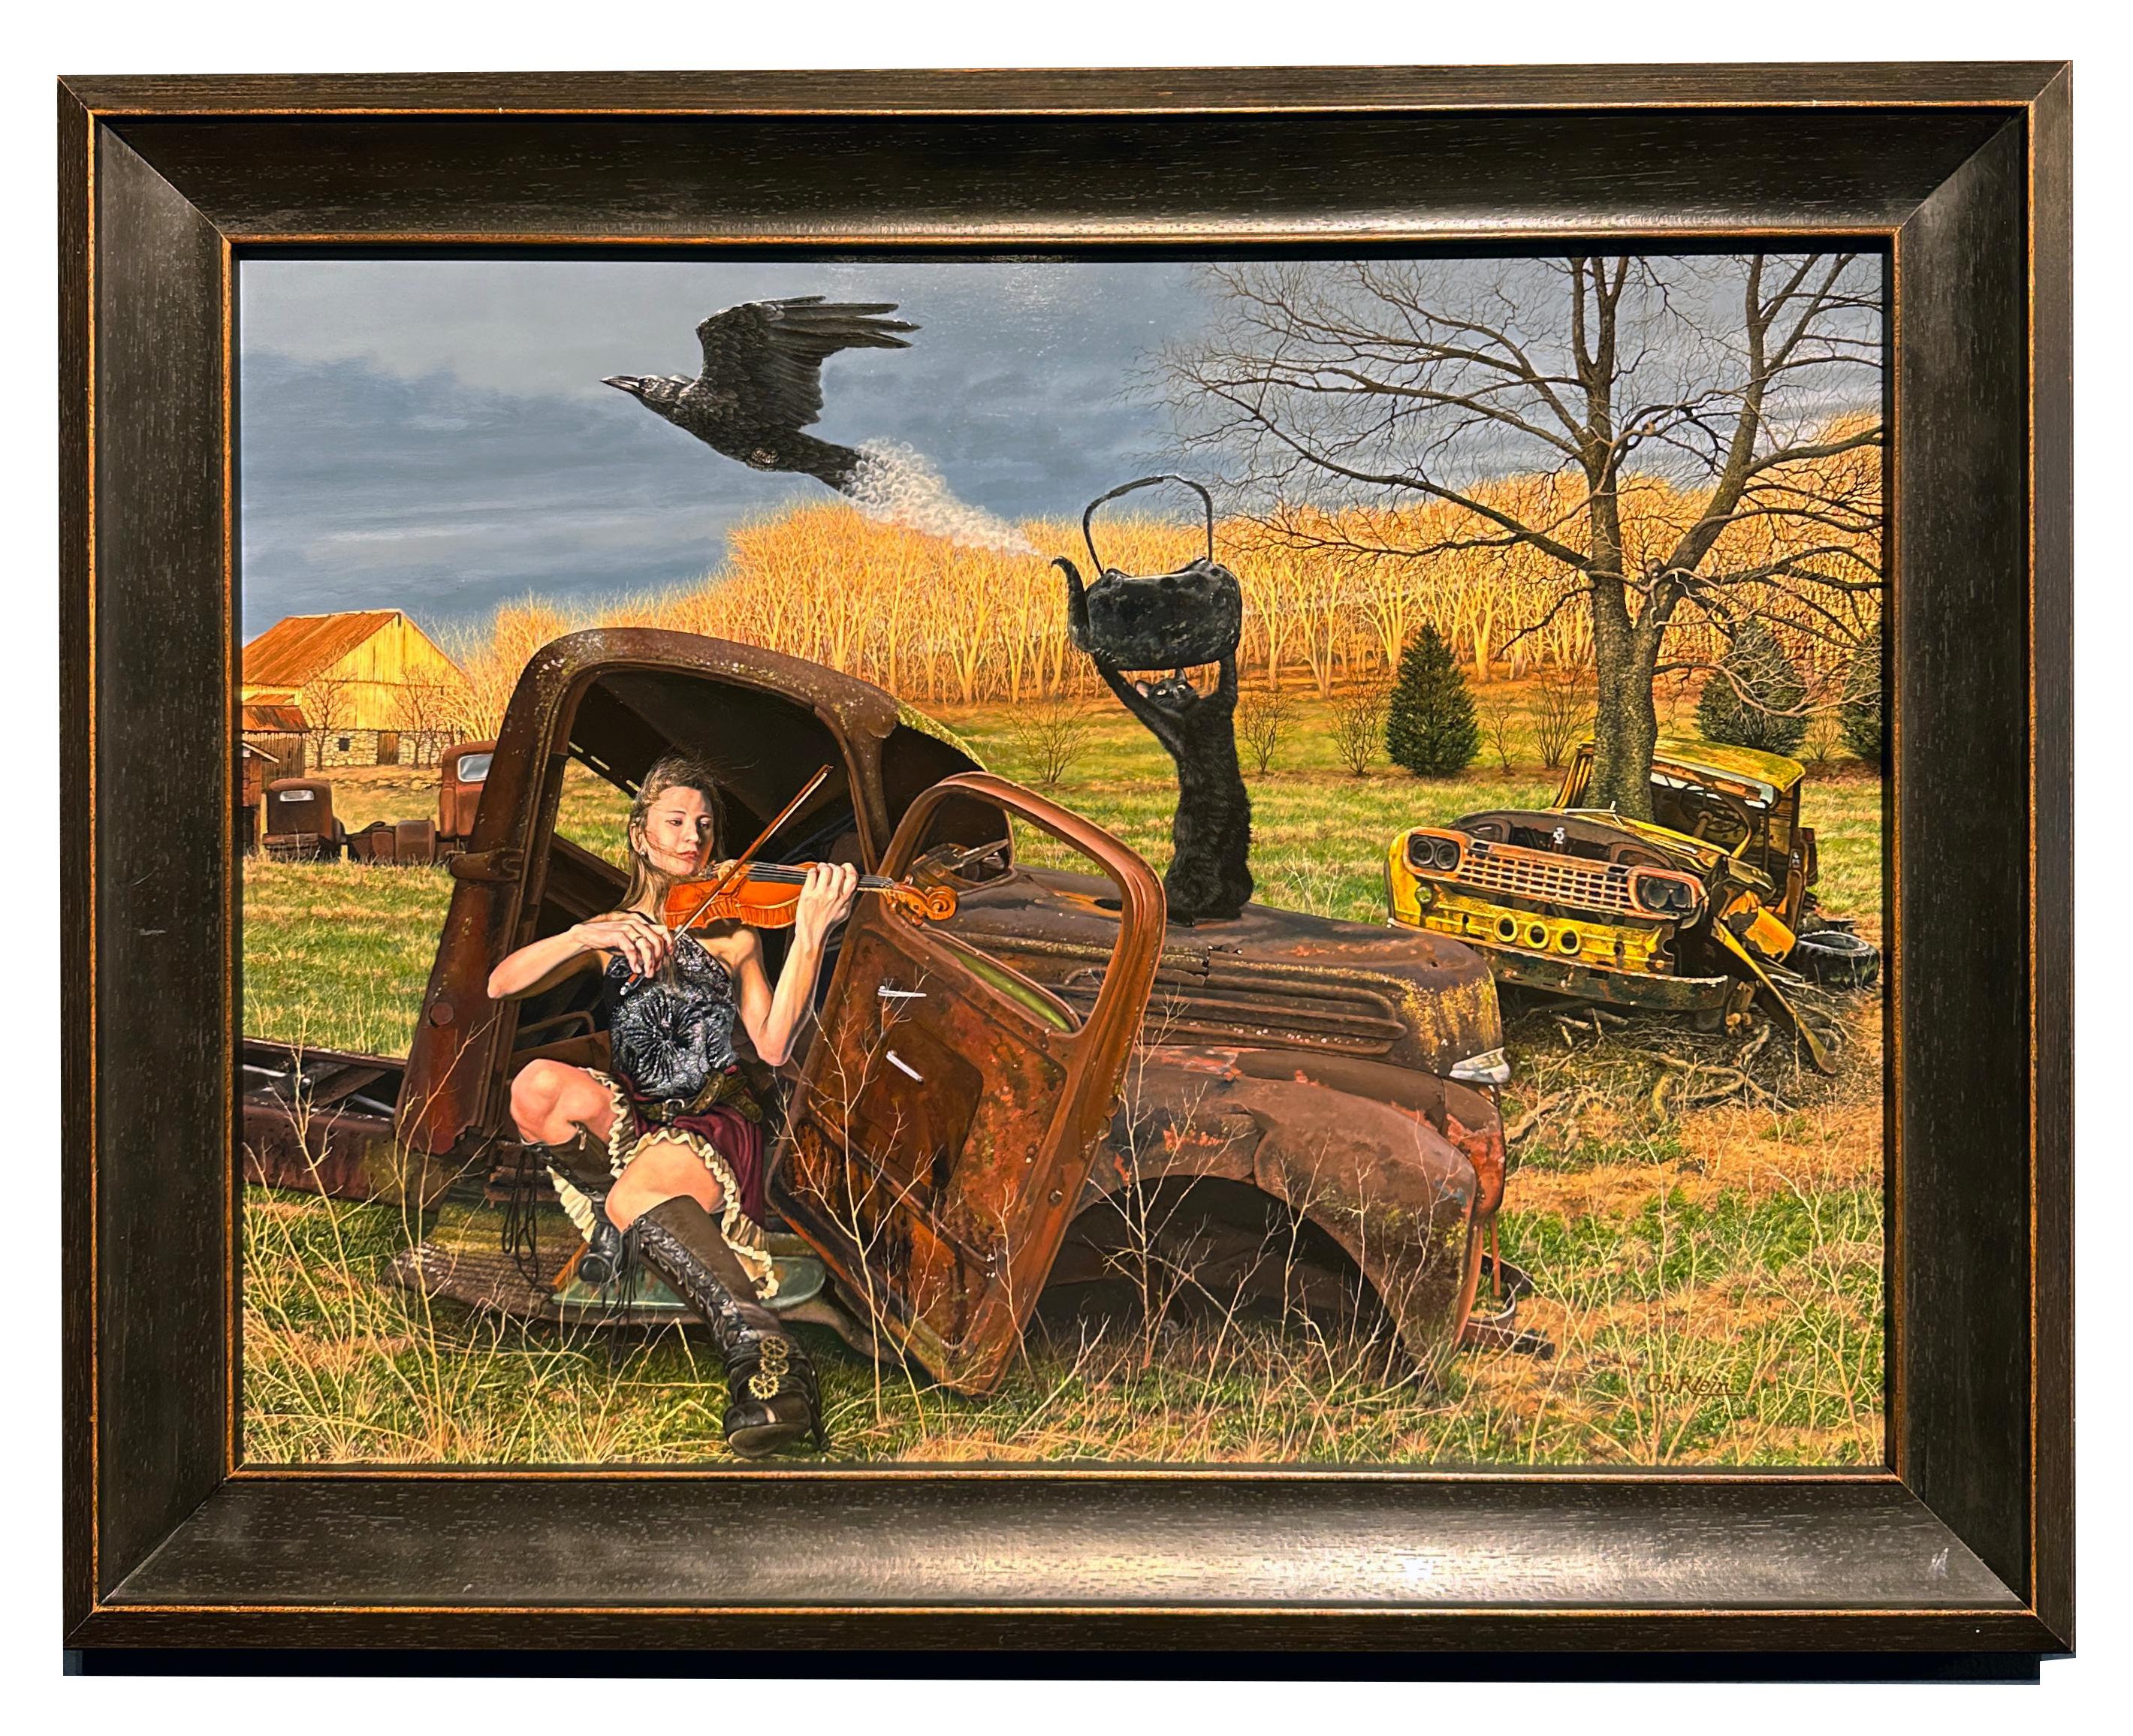 The Sound of the Changing Season - Surreal Rural Scene, Hyper-realistic - Painting by Christopher Klein